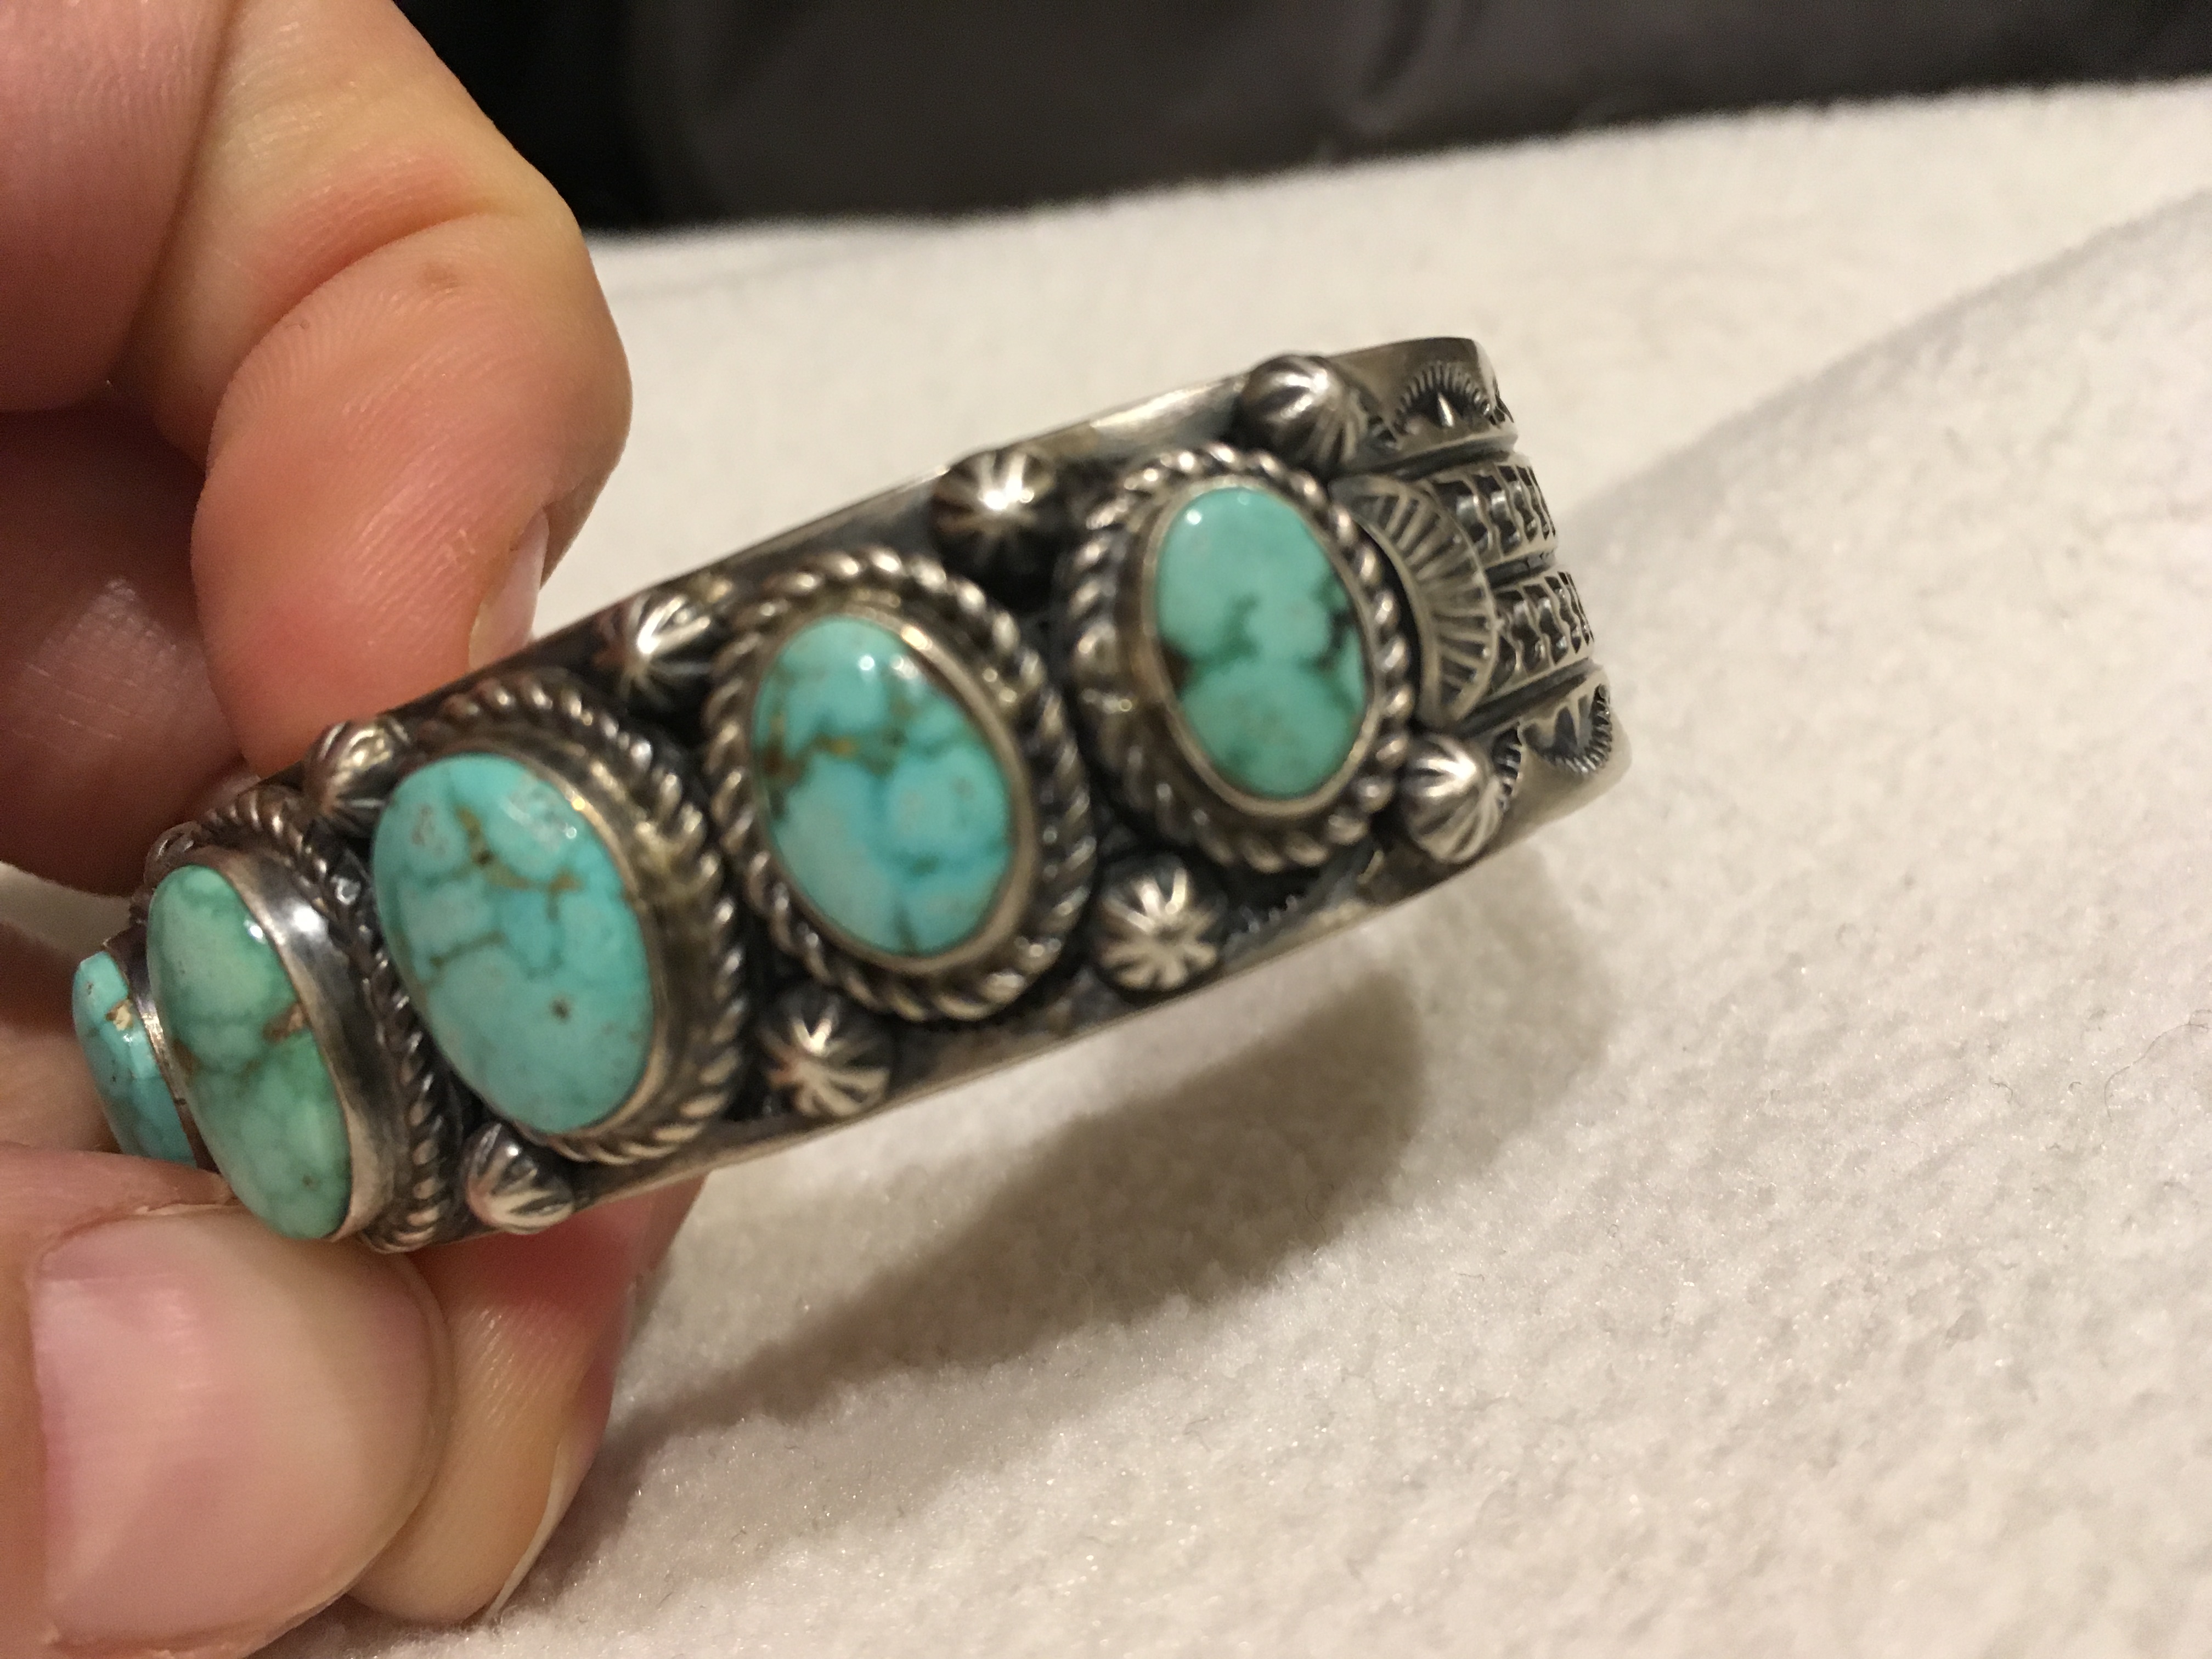 Cuff bracelet--real turquoise? - Real vs. Fake - Turquoise People